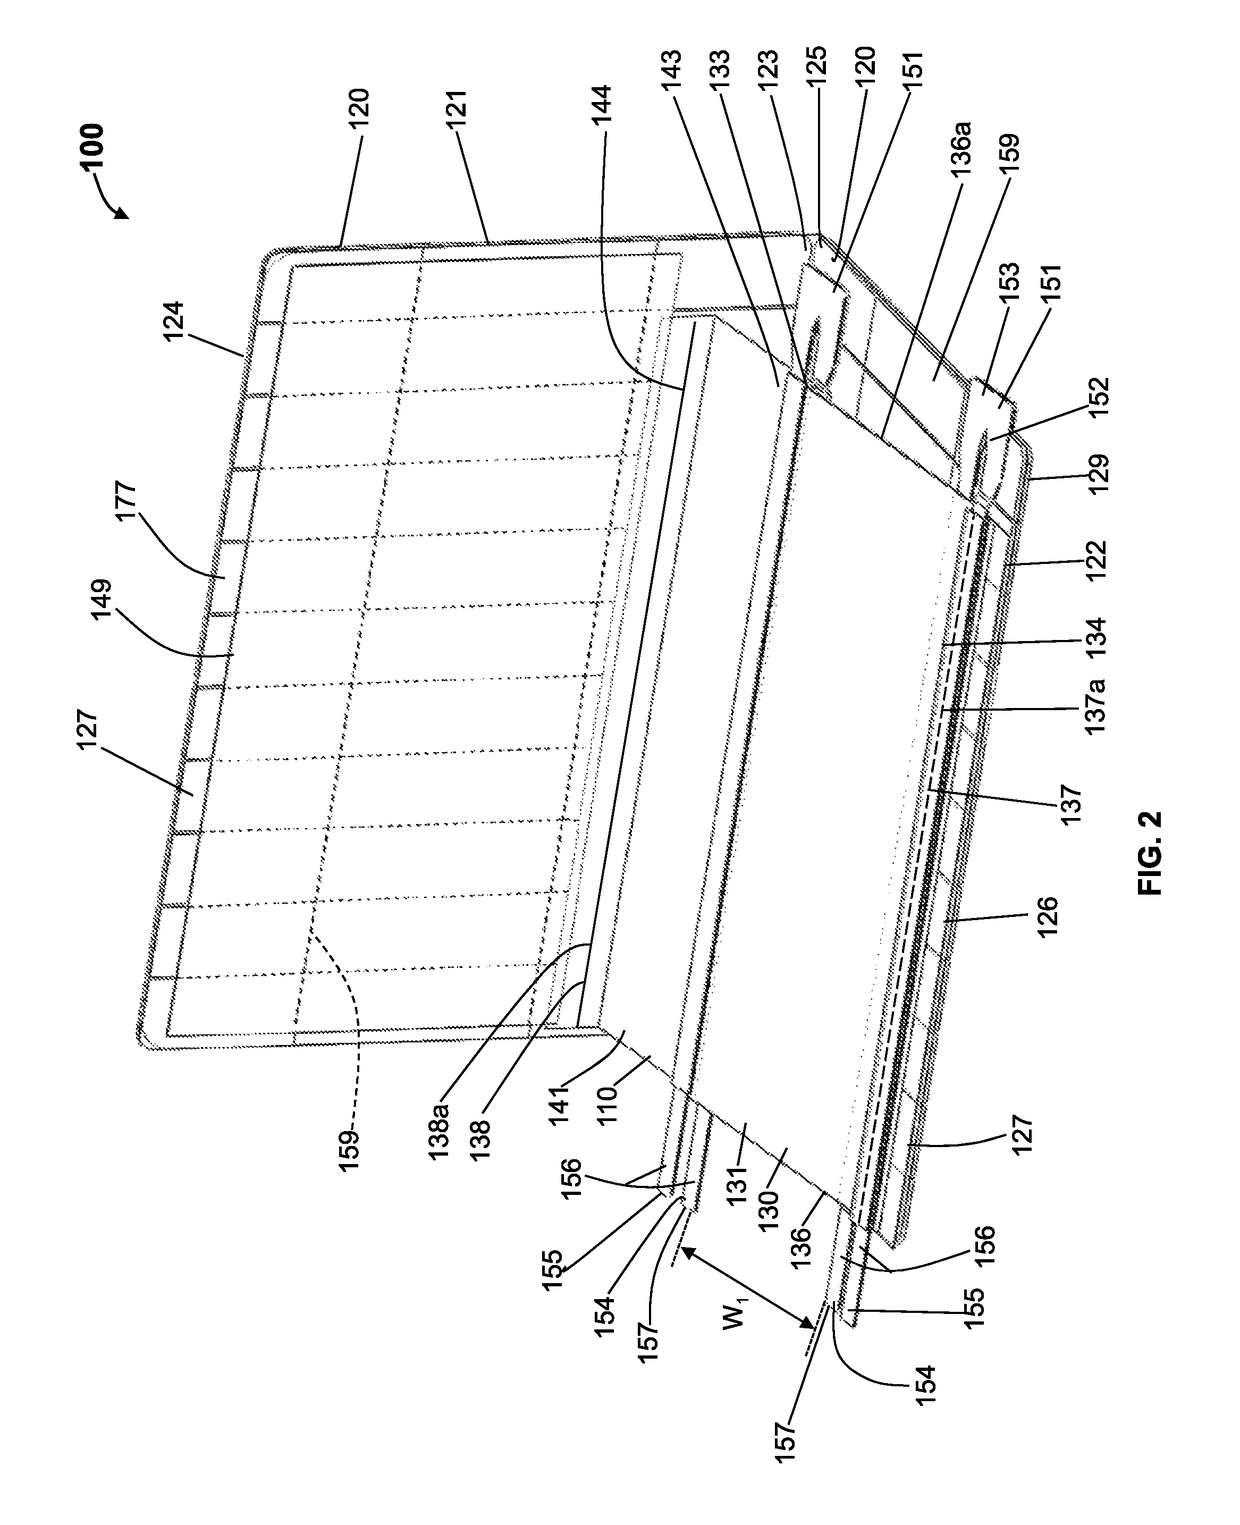 Wound or skin treatment devices with variable edge geometries